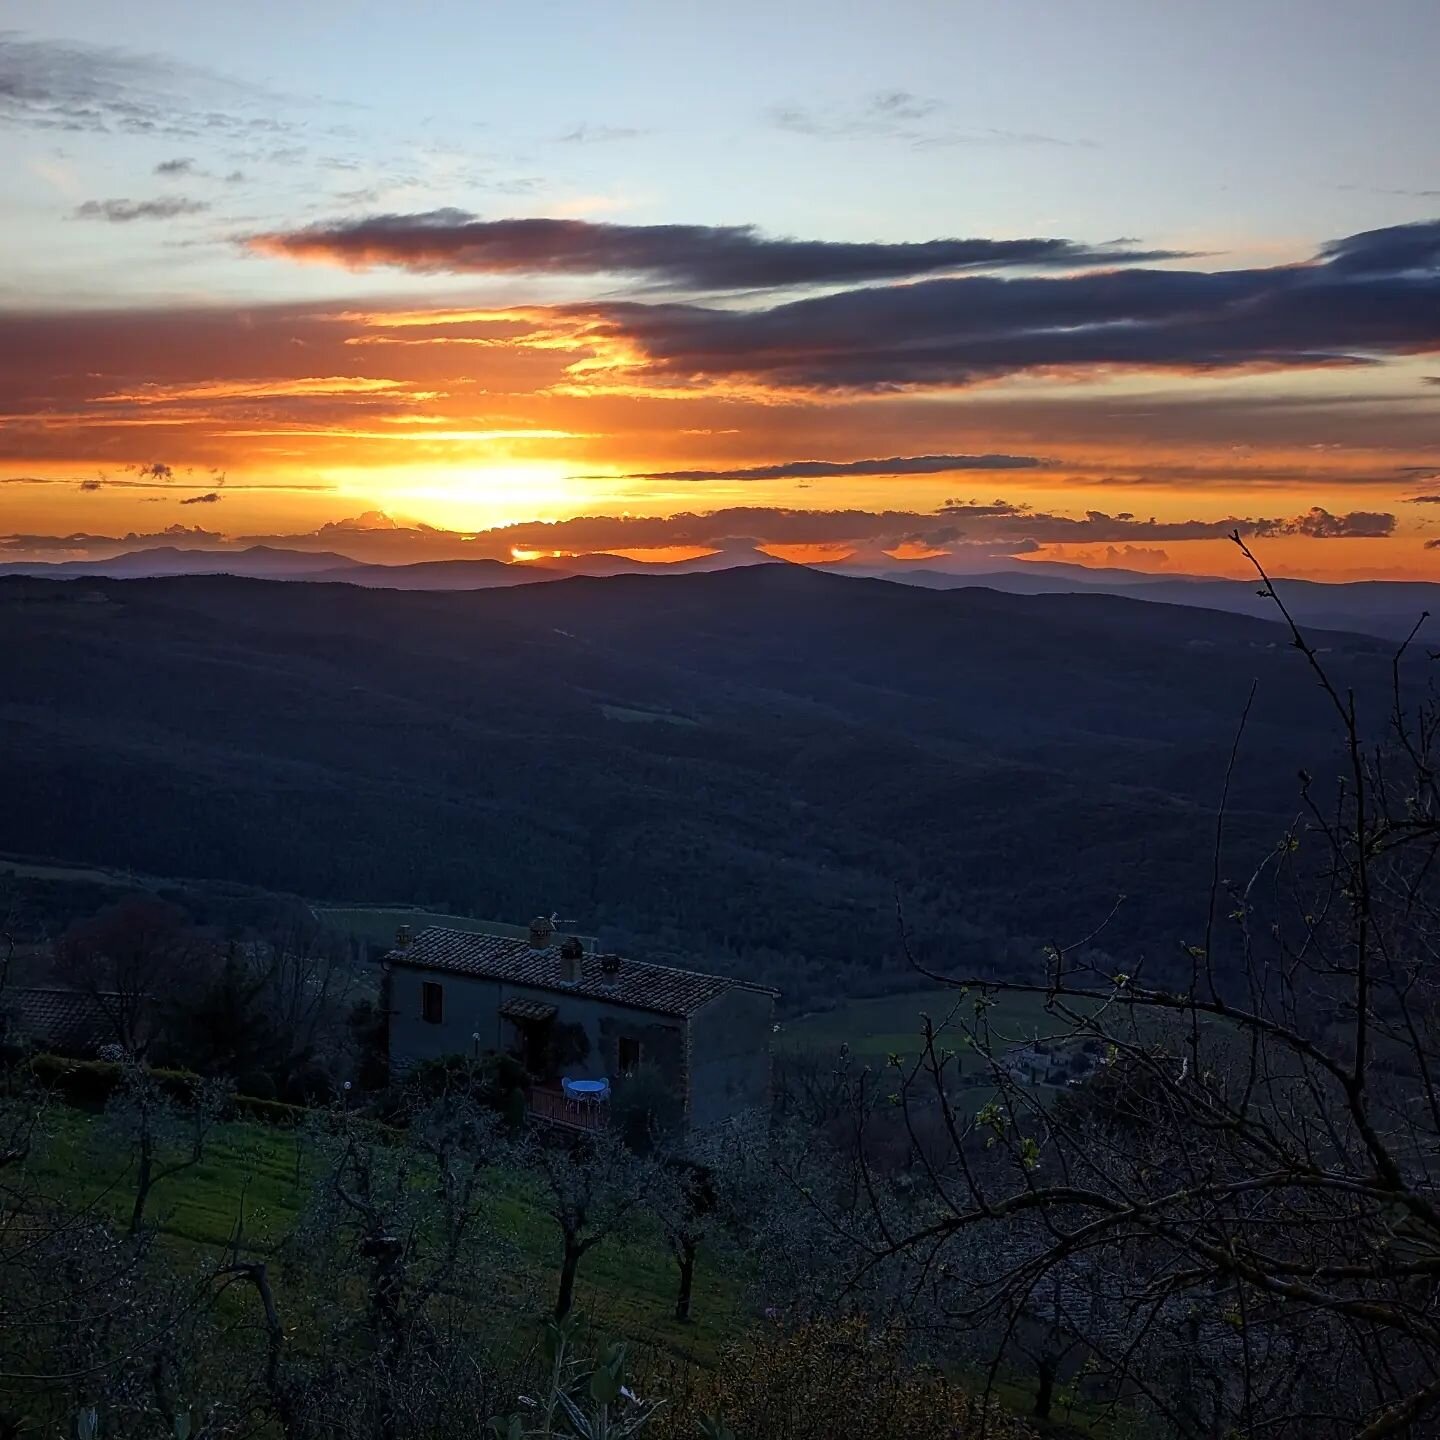 The wonderful thing about rainy days is that they bring about beautiful sunsets! Big thanks to @valdorciaterresenesi for hosting us at lunch. It was so delicious and fun that I forgot to take photos! So enjoy these sunset images and the sun-like deco